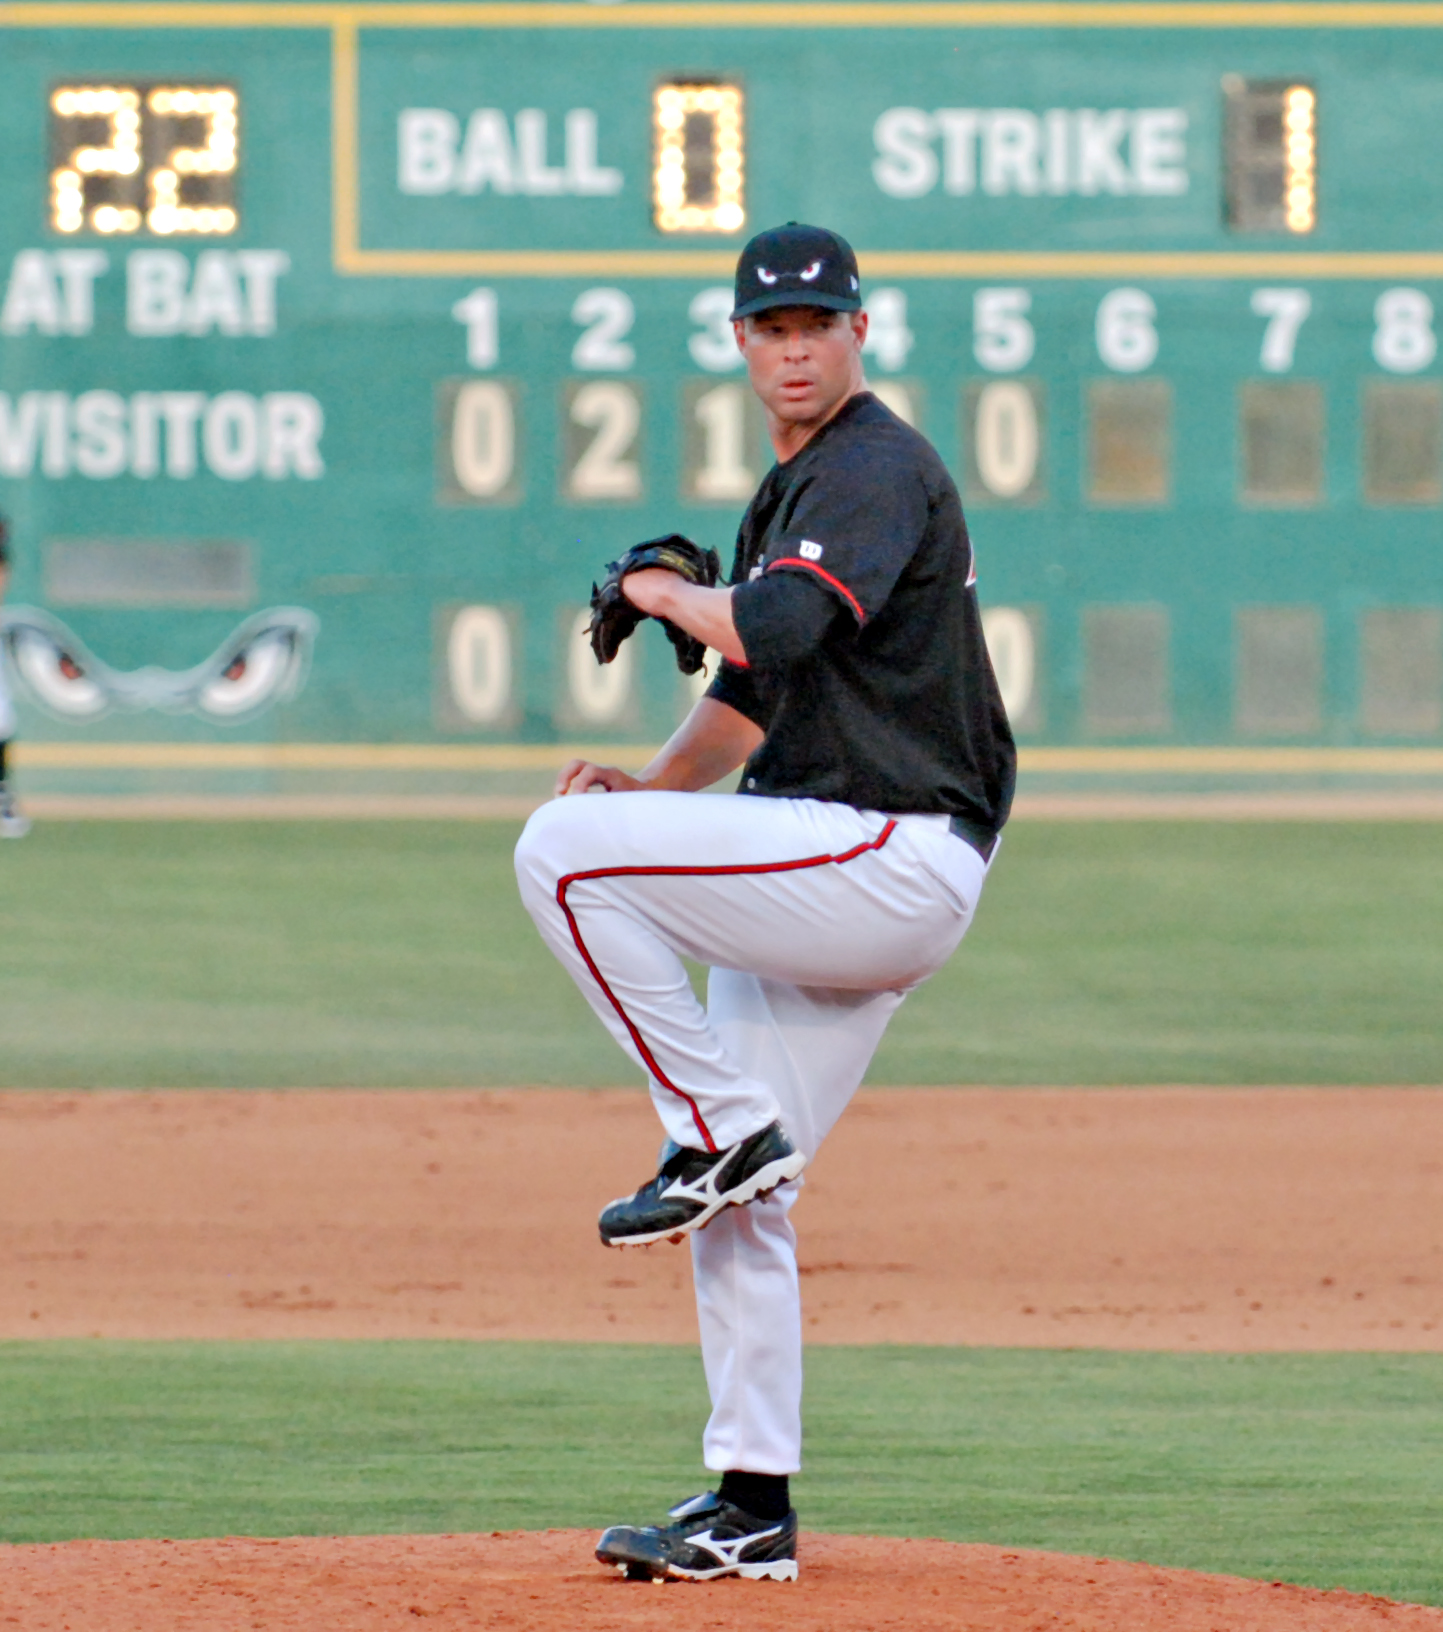 a baseball player pitching a baseball during a game